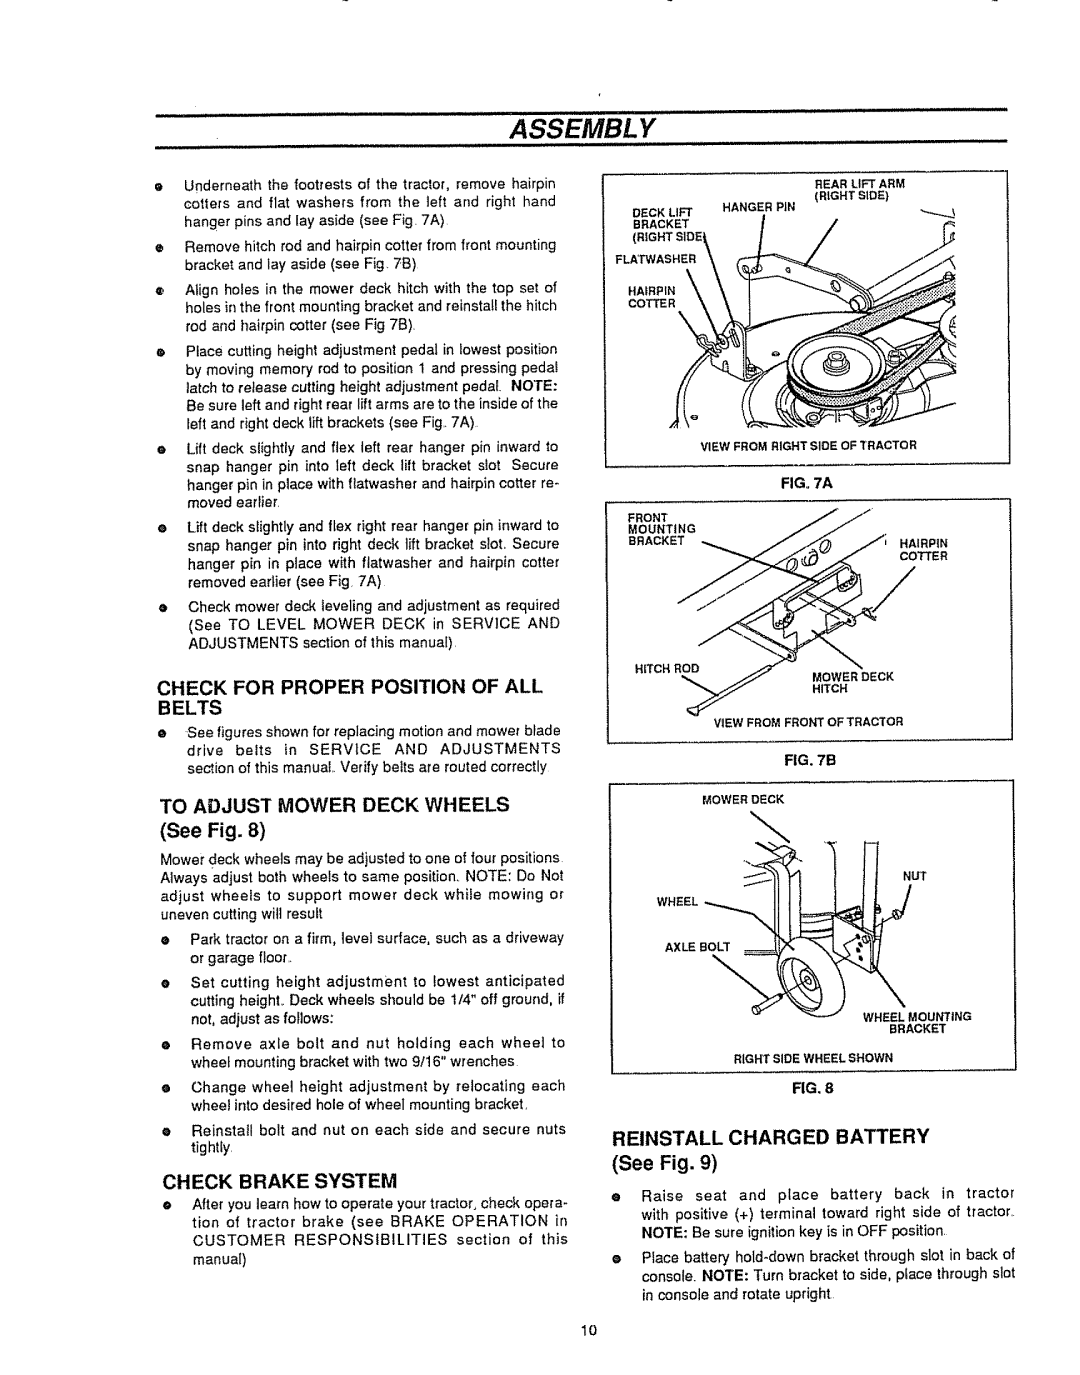 Sears 536.25587 Assembly, Belts, Reinstall Charged Battery, See Fig, Check For Proper Position Of All, Check Brake System 